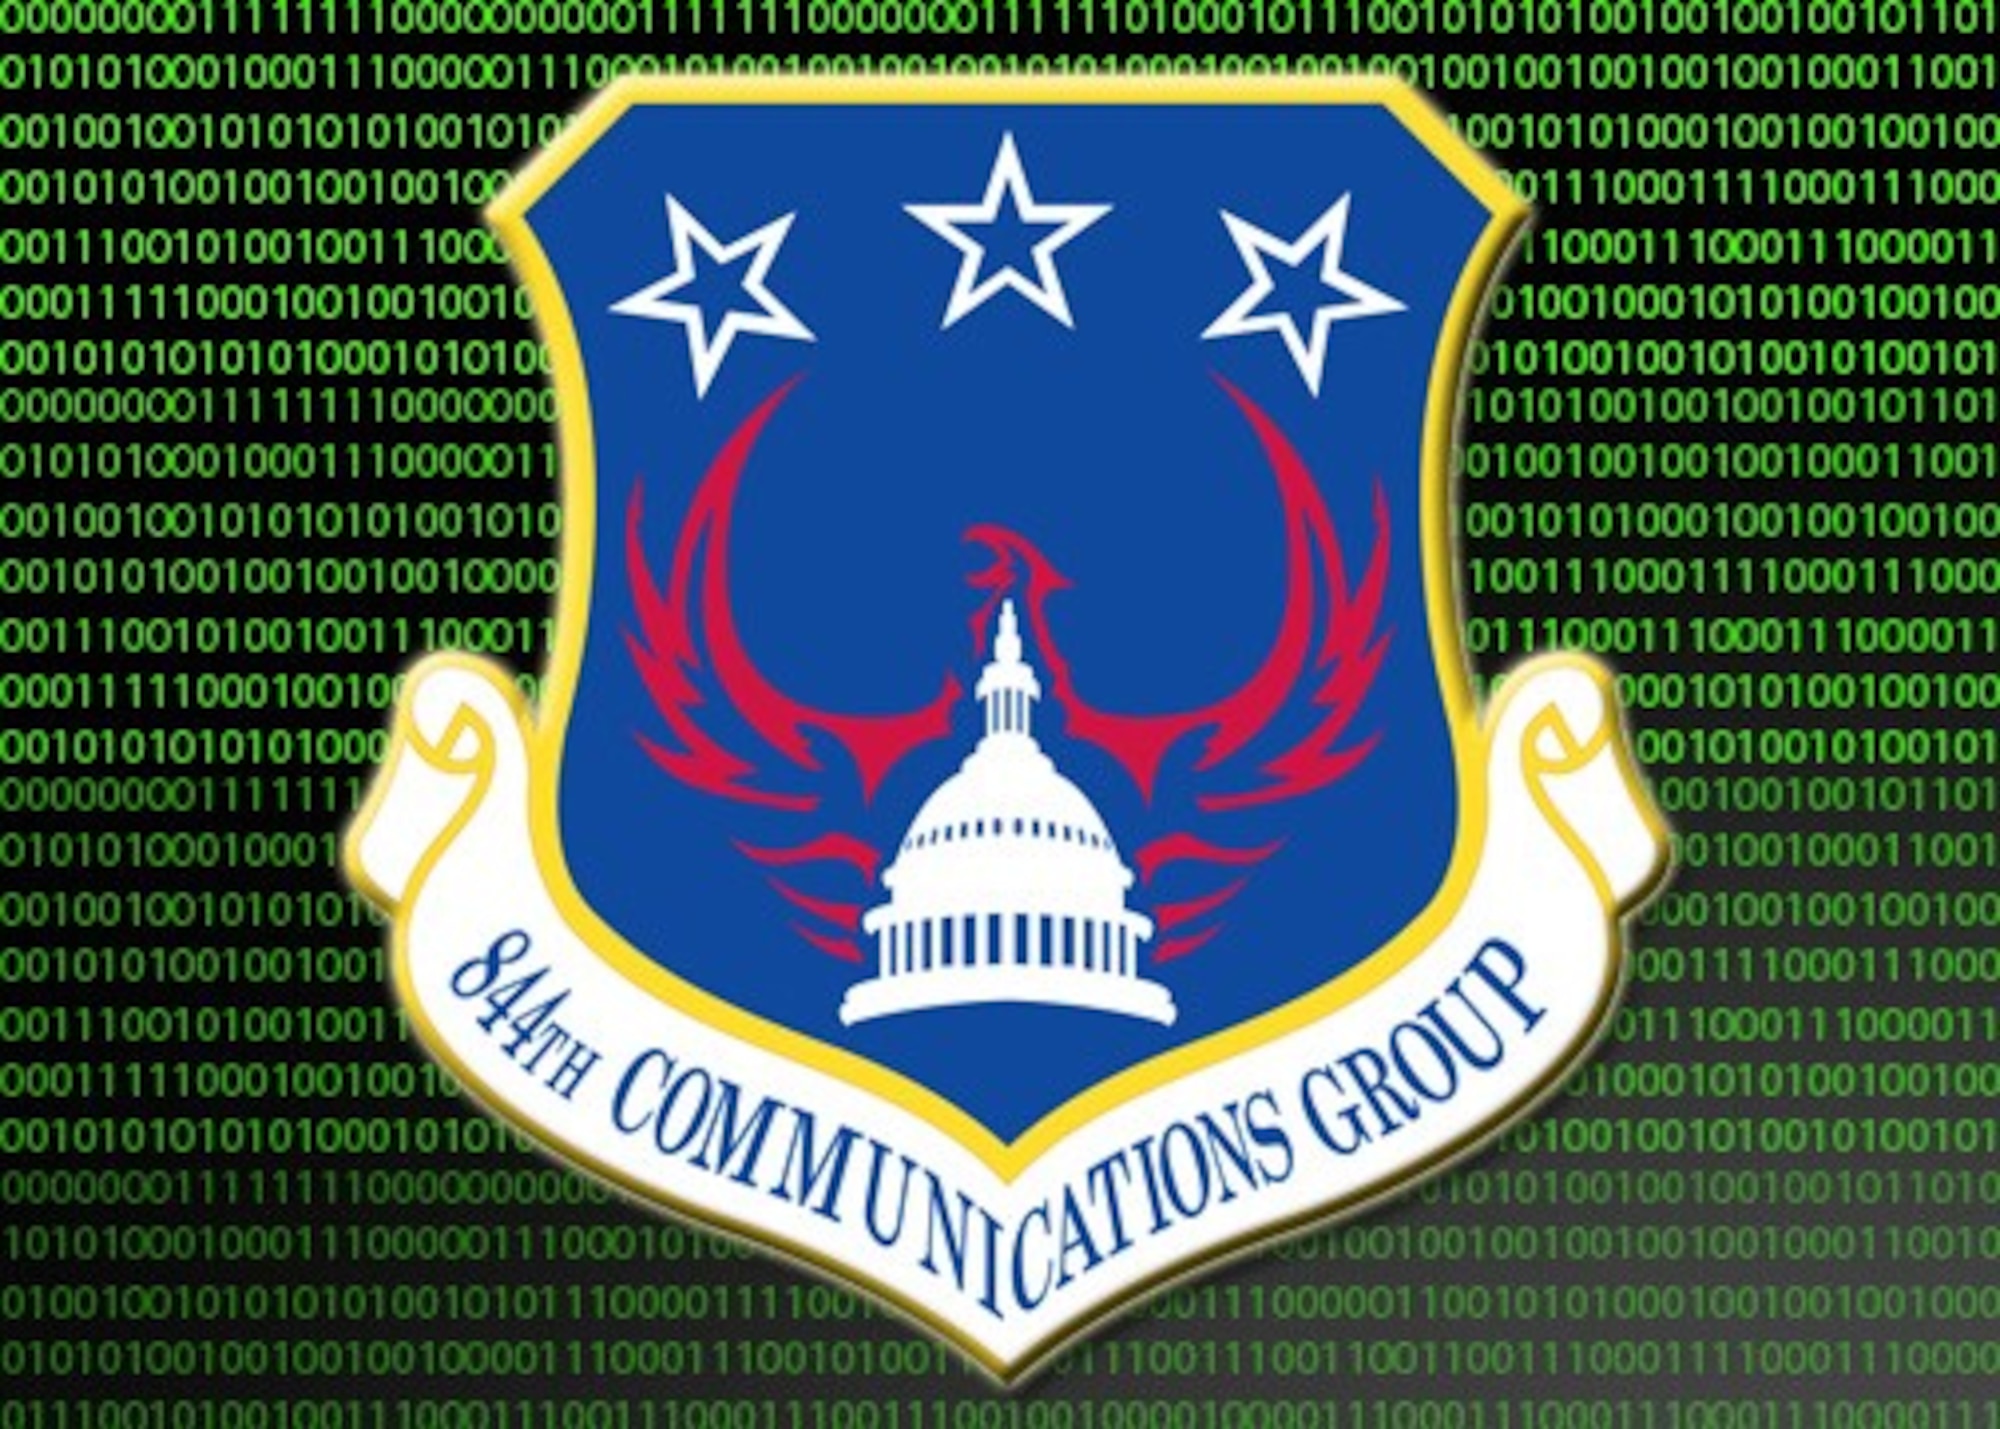 The 844th Communications Group provides cyber operations, executive support, and contingency response to Airmen throughout the NCR, including the Air Force District of Washington (AFDW), and a variety of DoD agencies globally. (U.S. Air Force graphic/Tech. Sgt. Matt Davis)